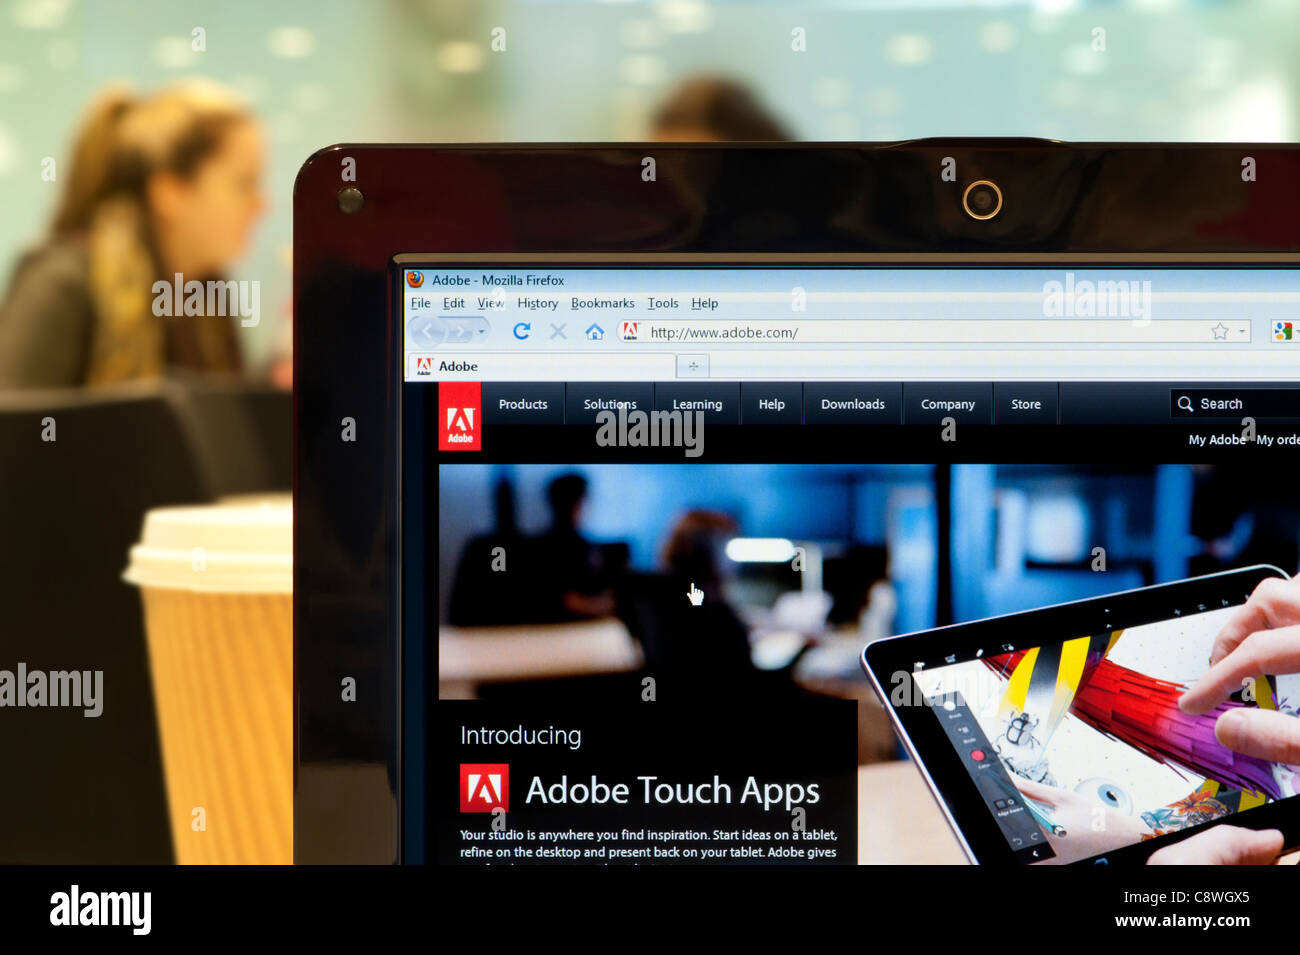 The Adobe website shot in a coffee shop environment (Editorial use only: print, TV, e-book and editorial website). Stock Photo